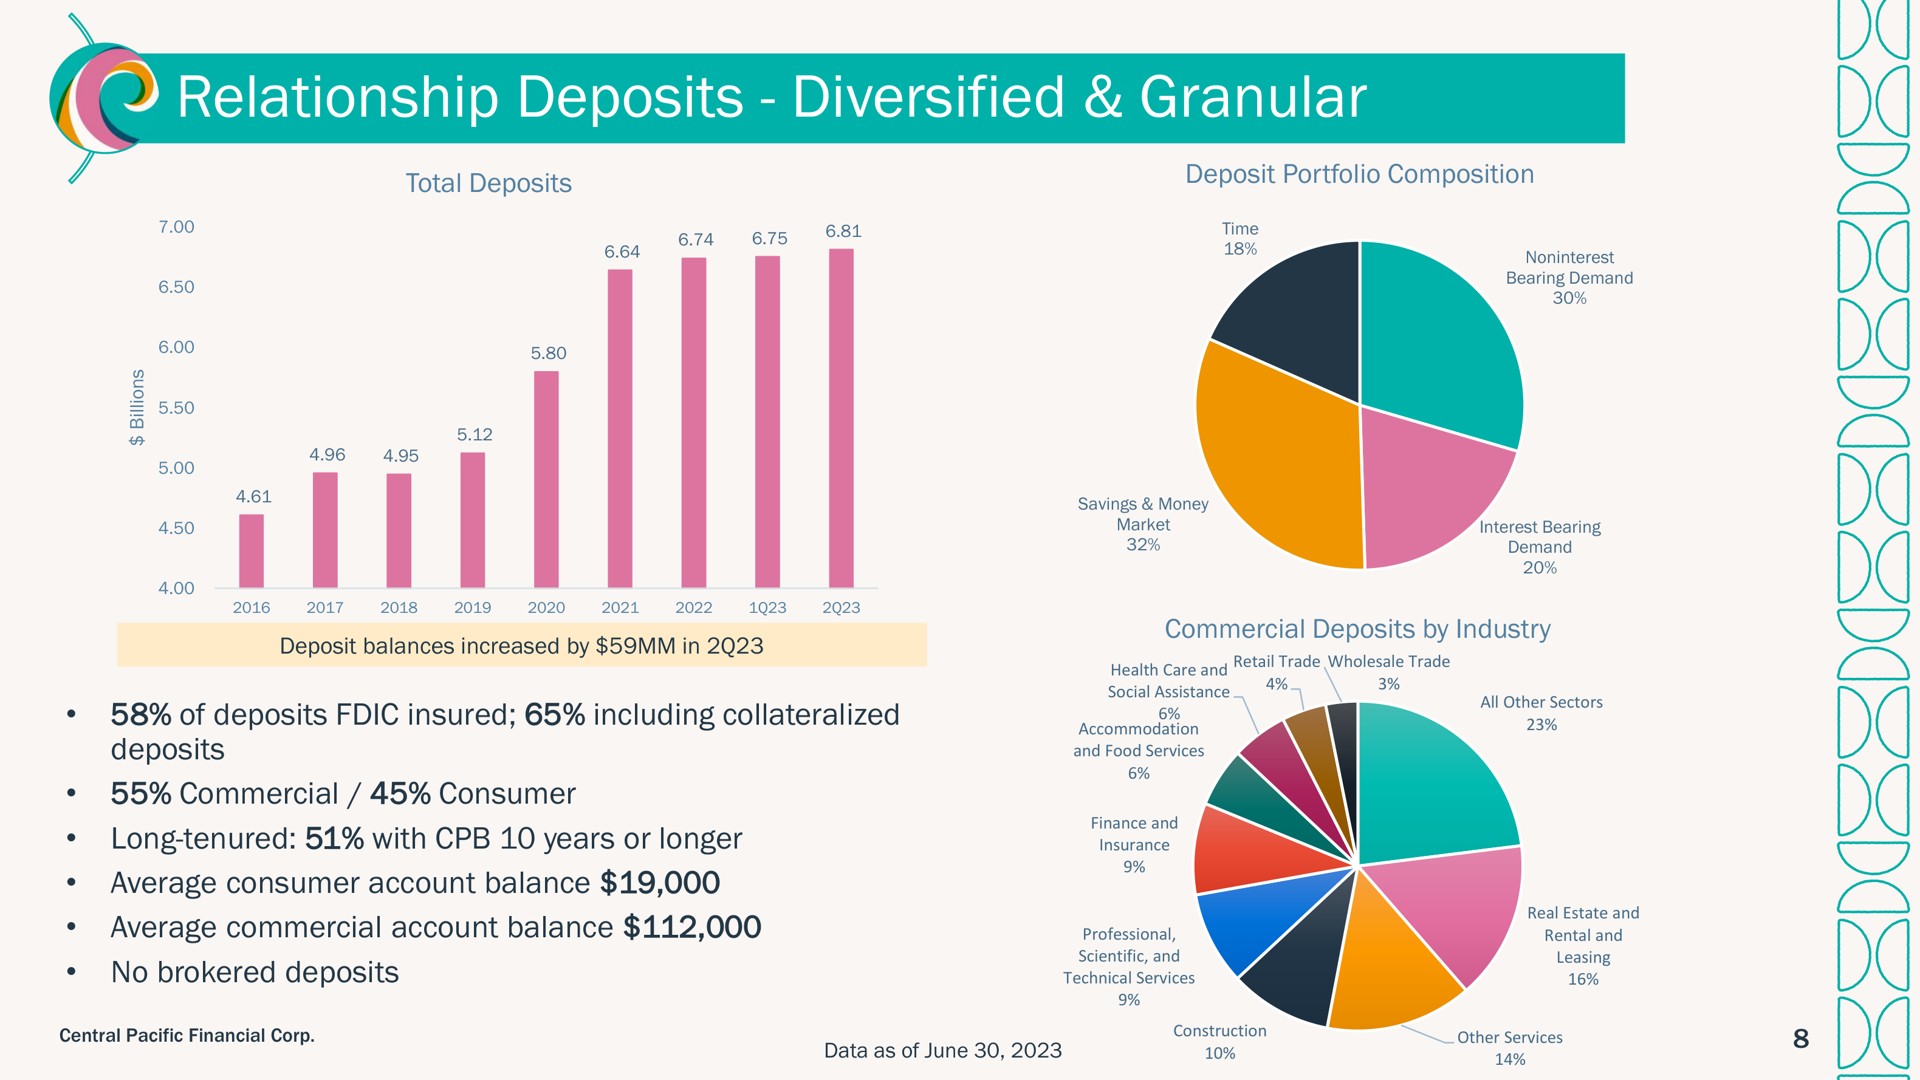 relationship deposits diversified granular i | Central Pacific Financial